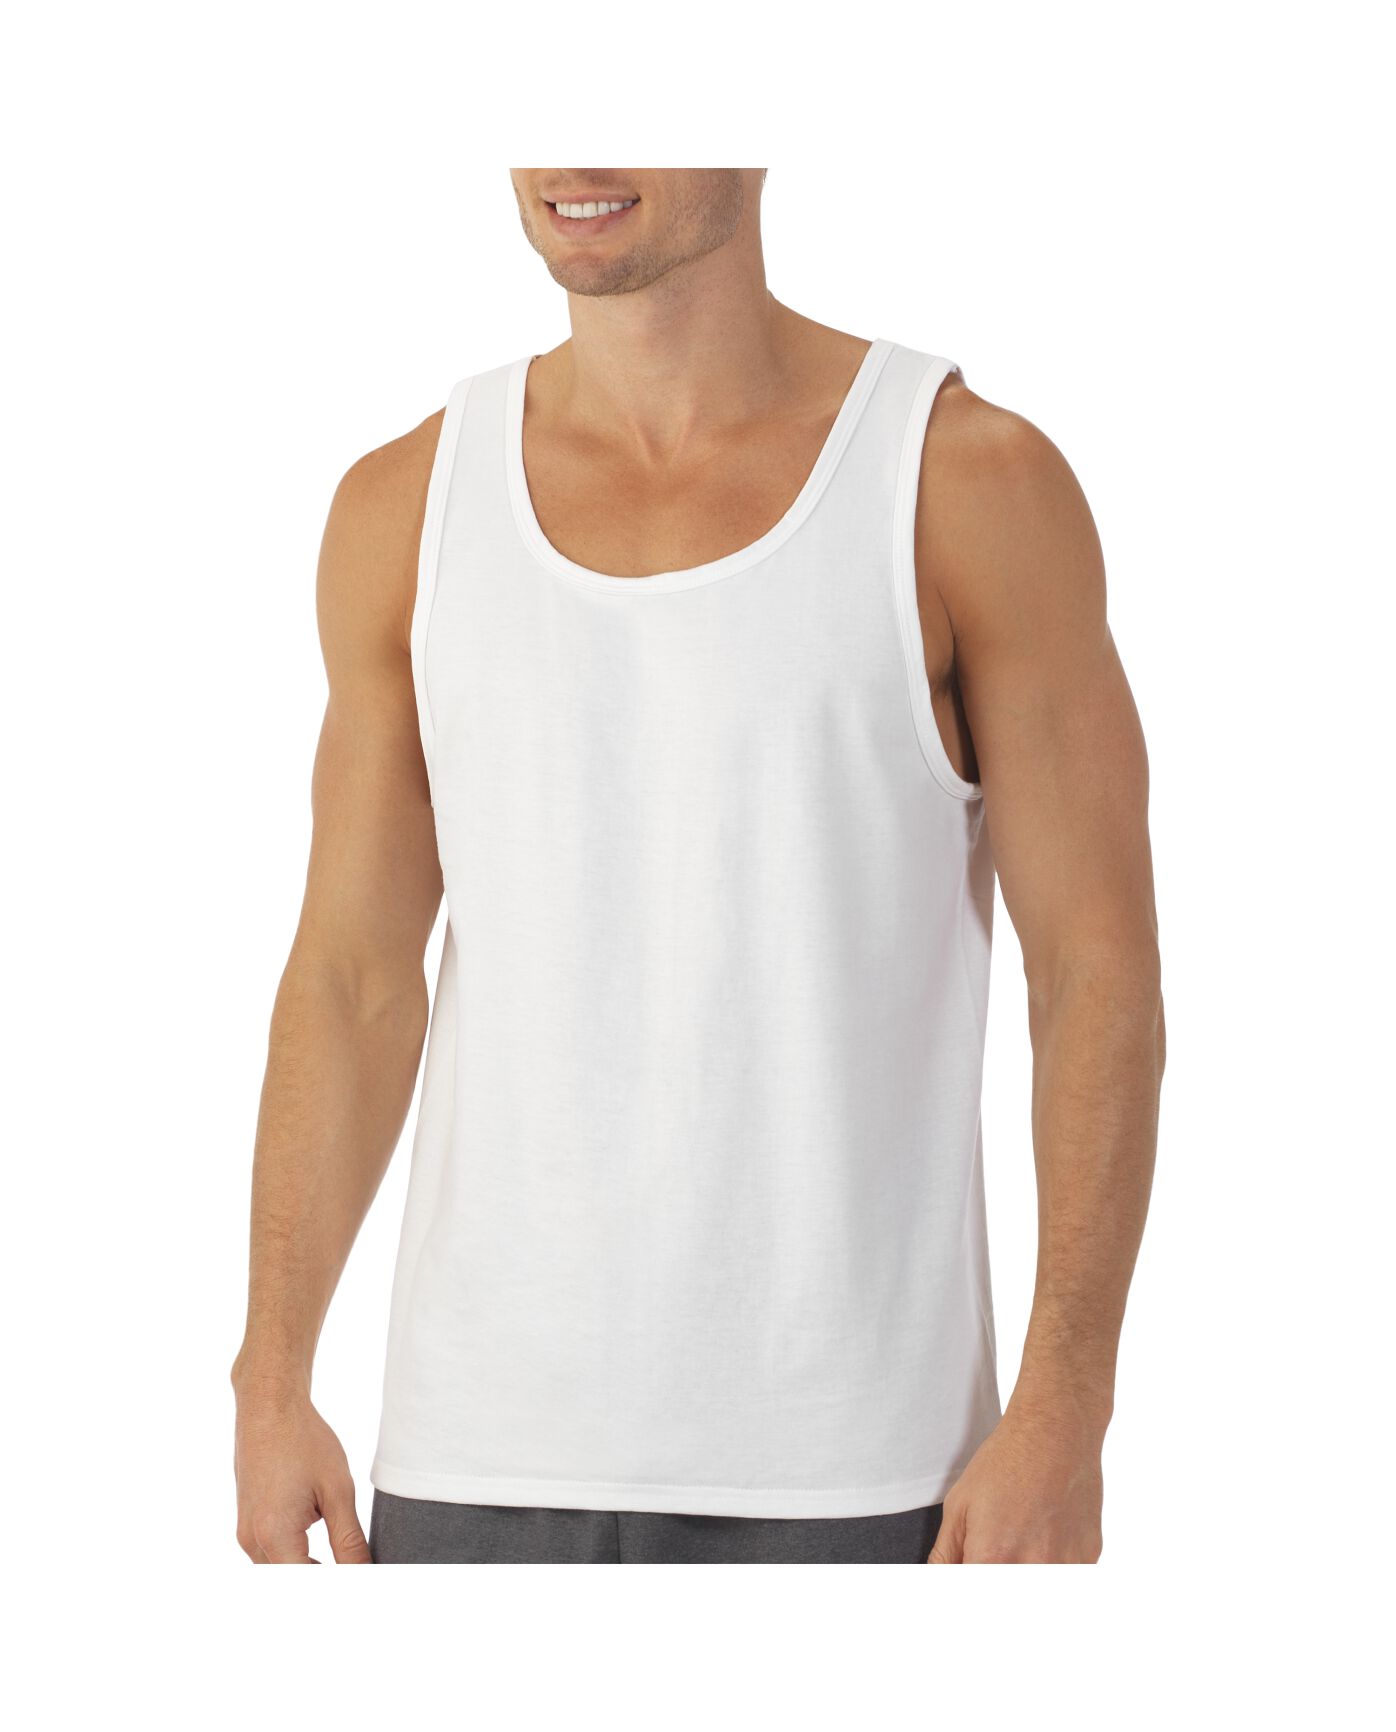 Big Men's EverSoft Jersey Tank Top, Available in Extended Sizes White